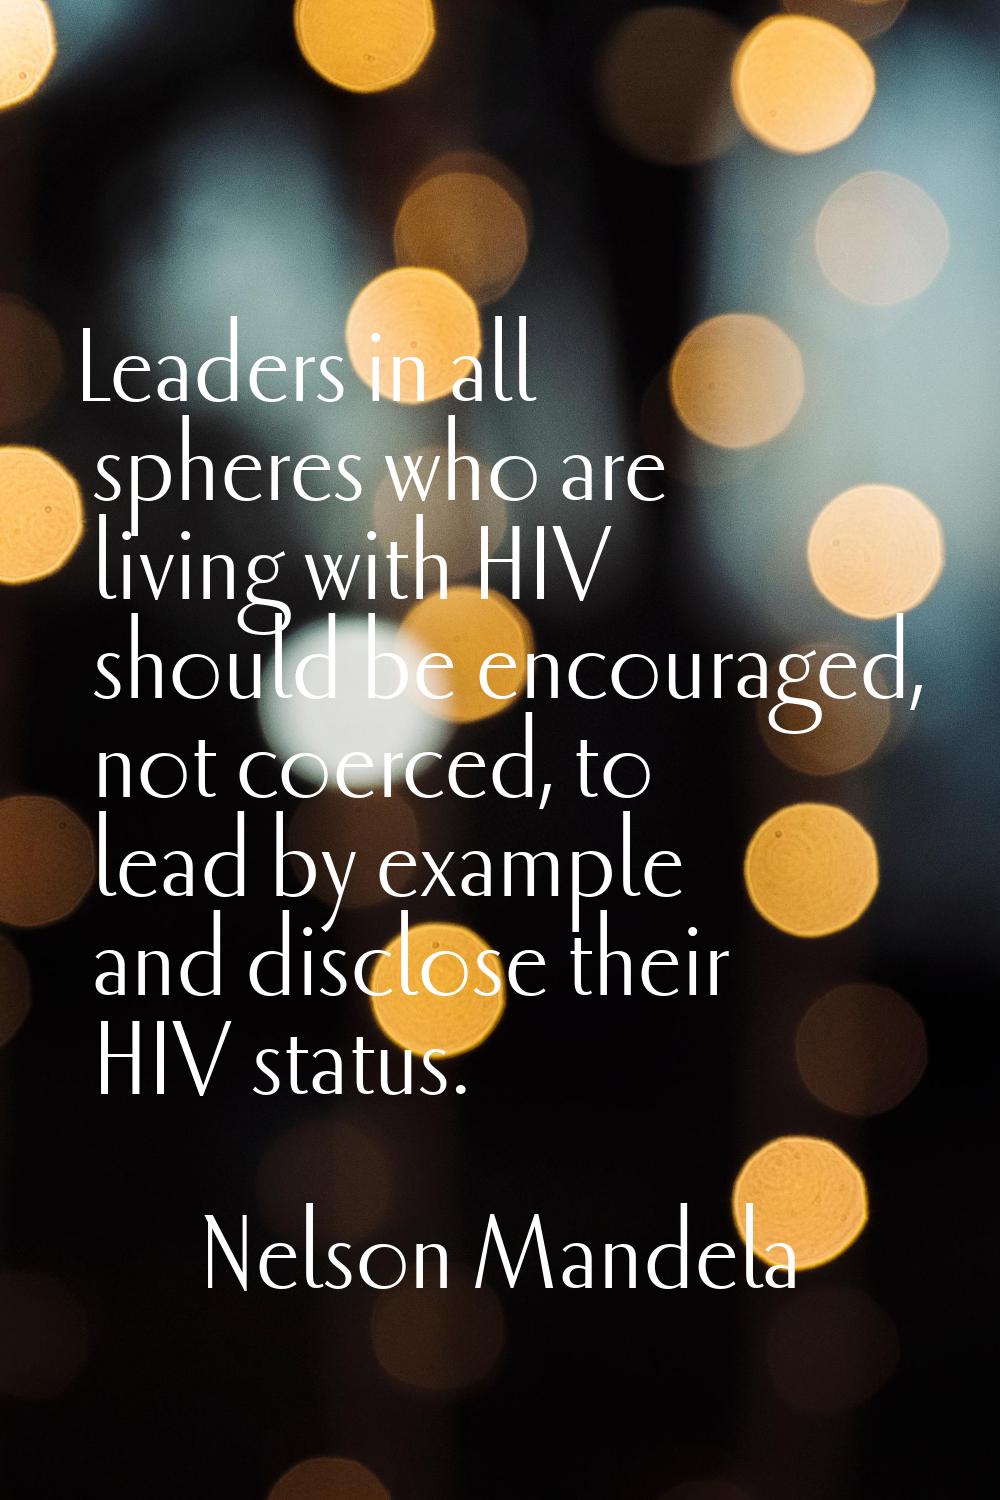 Leaders in all spheres who are living with HIV should be encouraged, not coerced, to lead by exampl